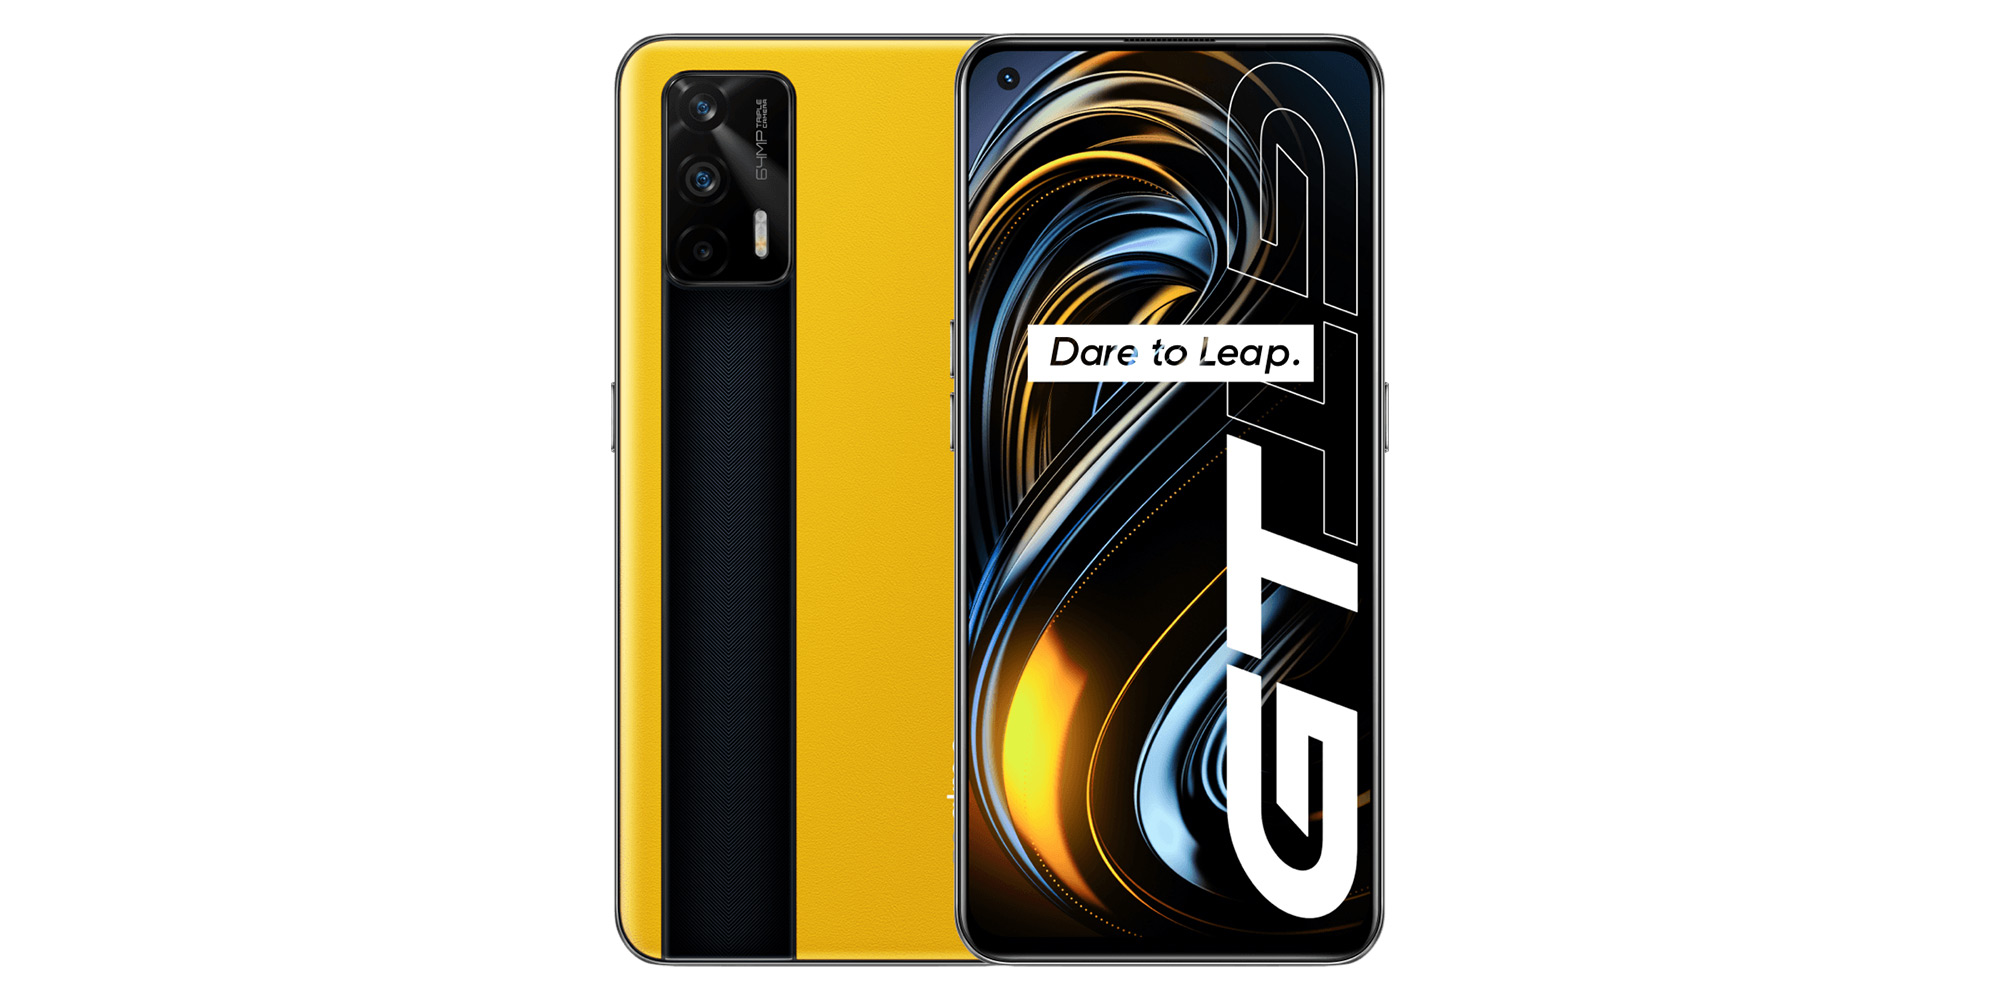 Realme GT 5G goes official w/ Snapdragon 888, $430 price - 9to5Google